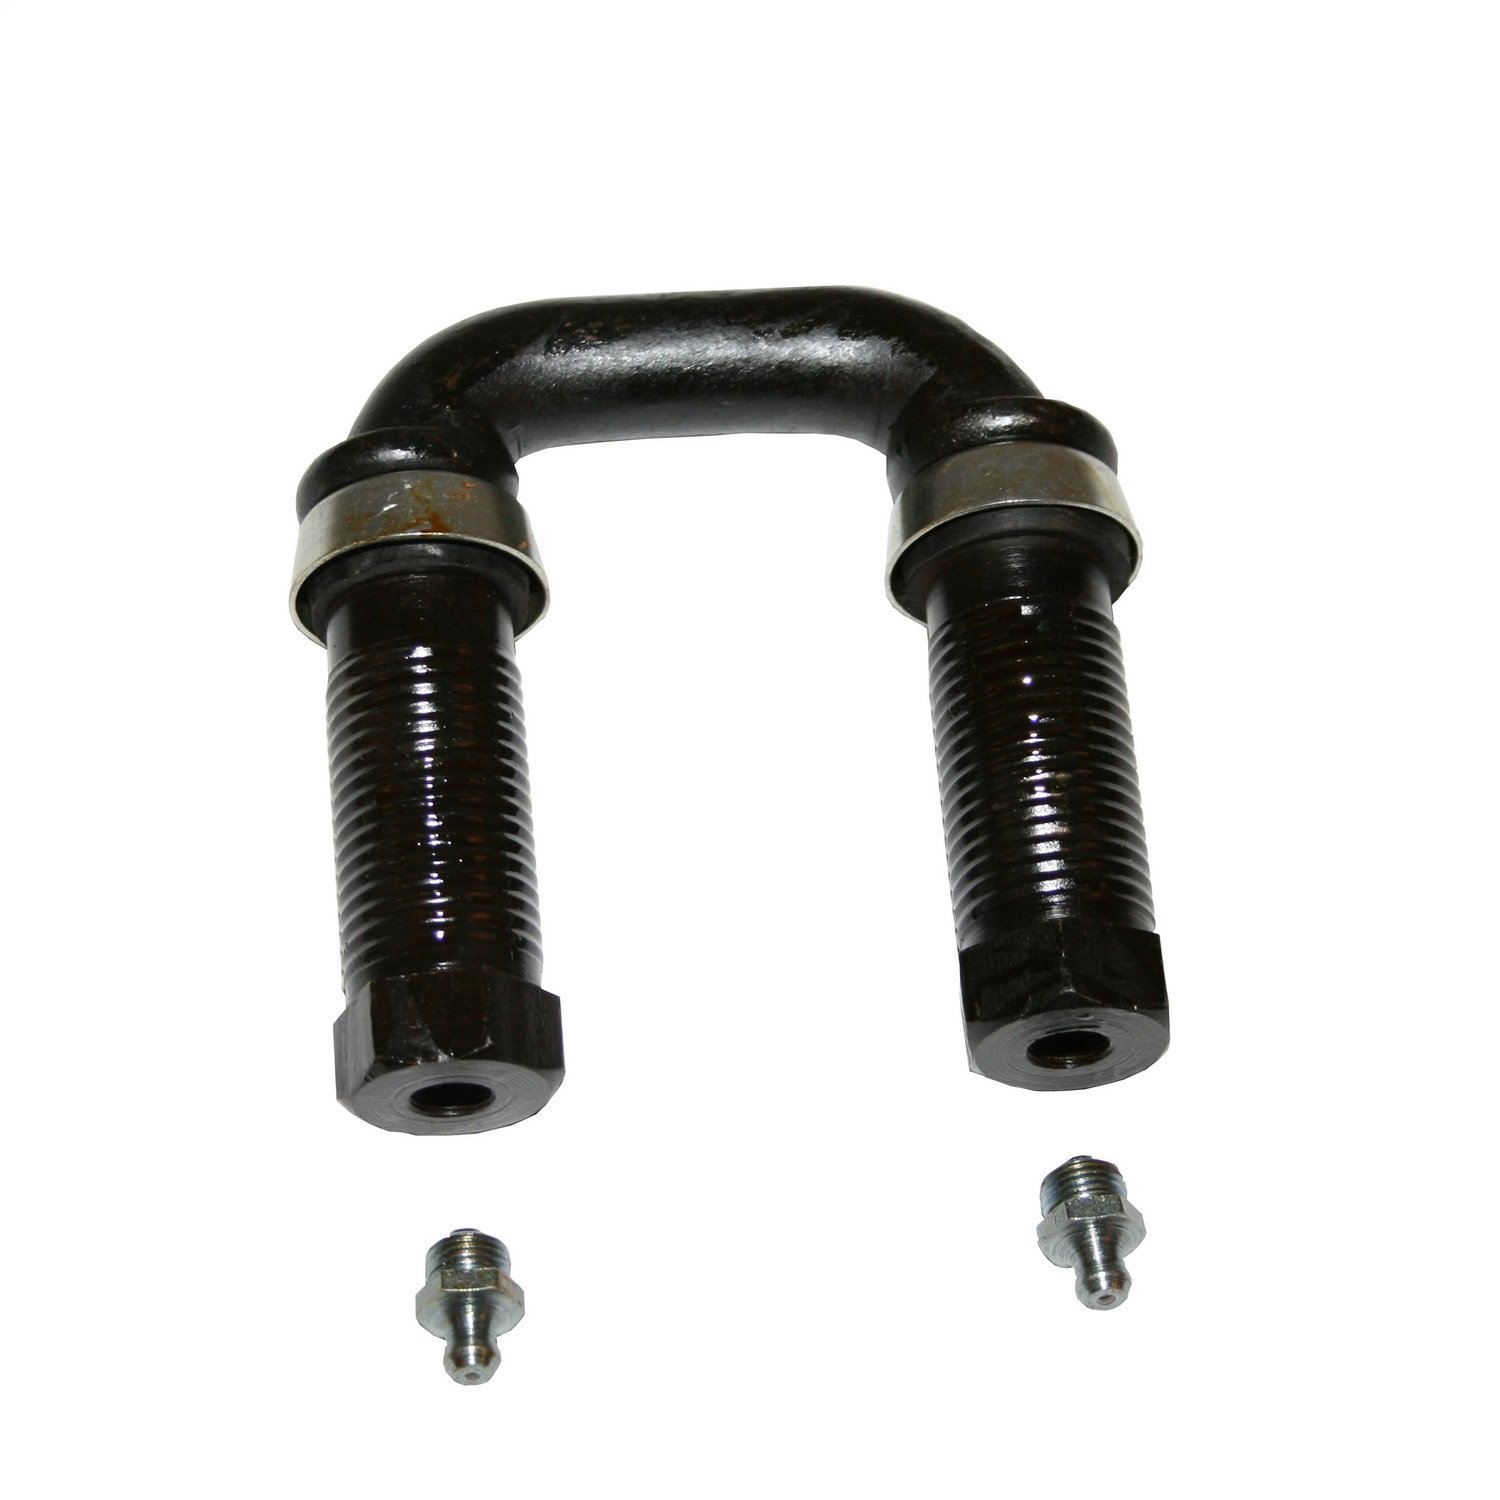 Leaf Spring Shackle Kit for Select 1941-1968 Willys Jeep Models [U-Style, Right Hand Thread]